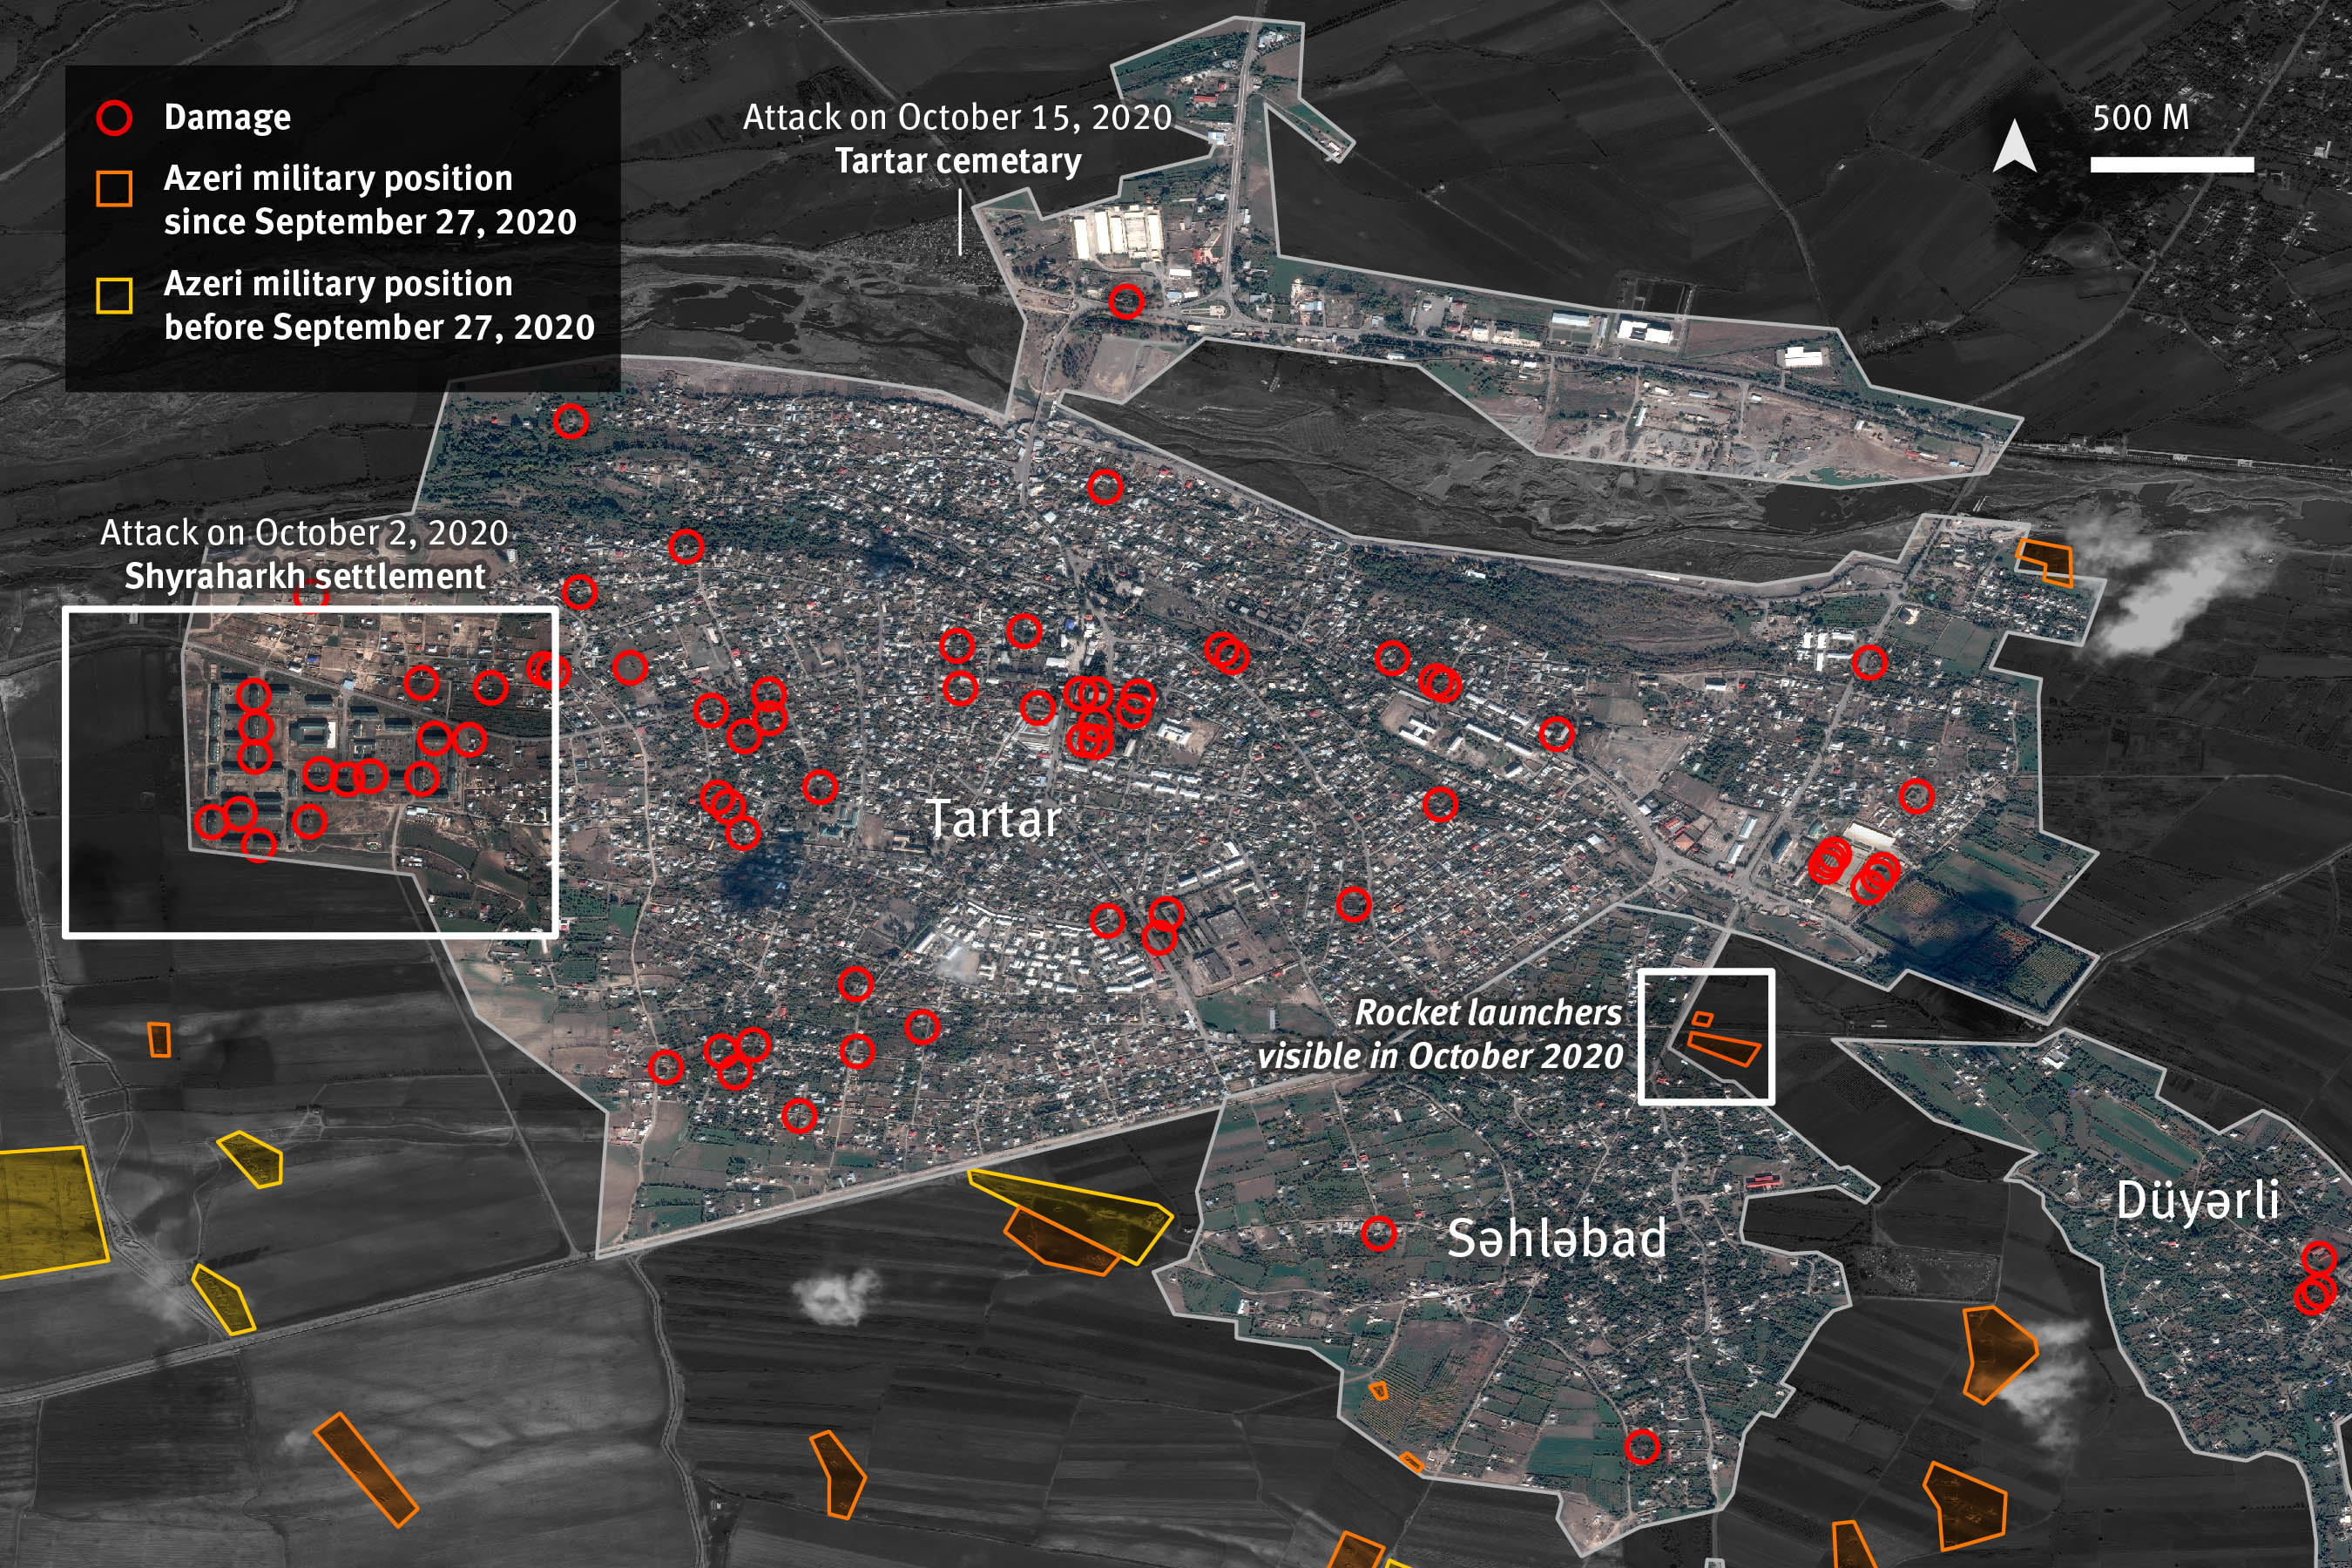 Map 2. Satellite imagery analysis of damaged sites and military positions established during October 2020 in the city of Tartar, as of October 23, 2020. 